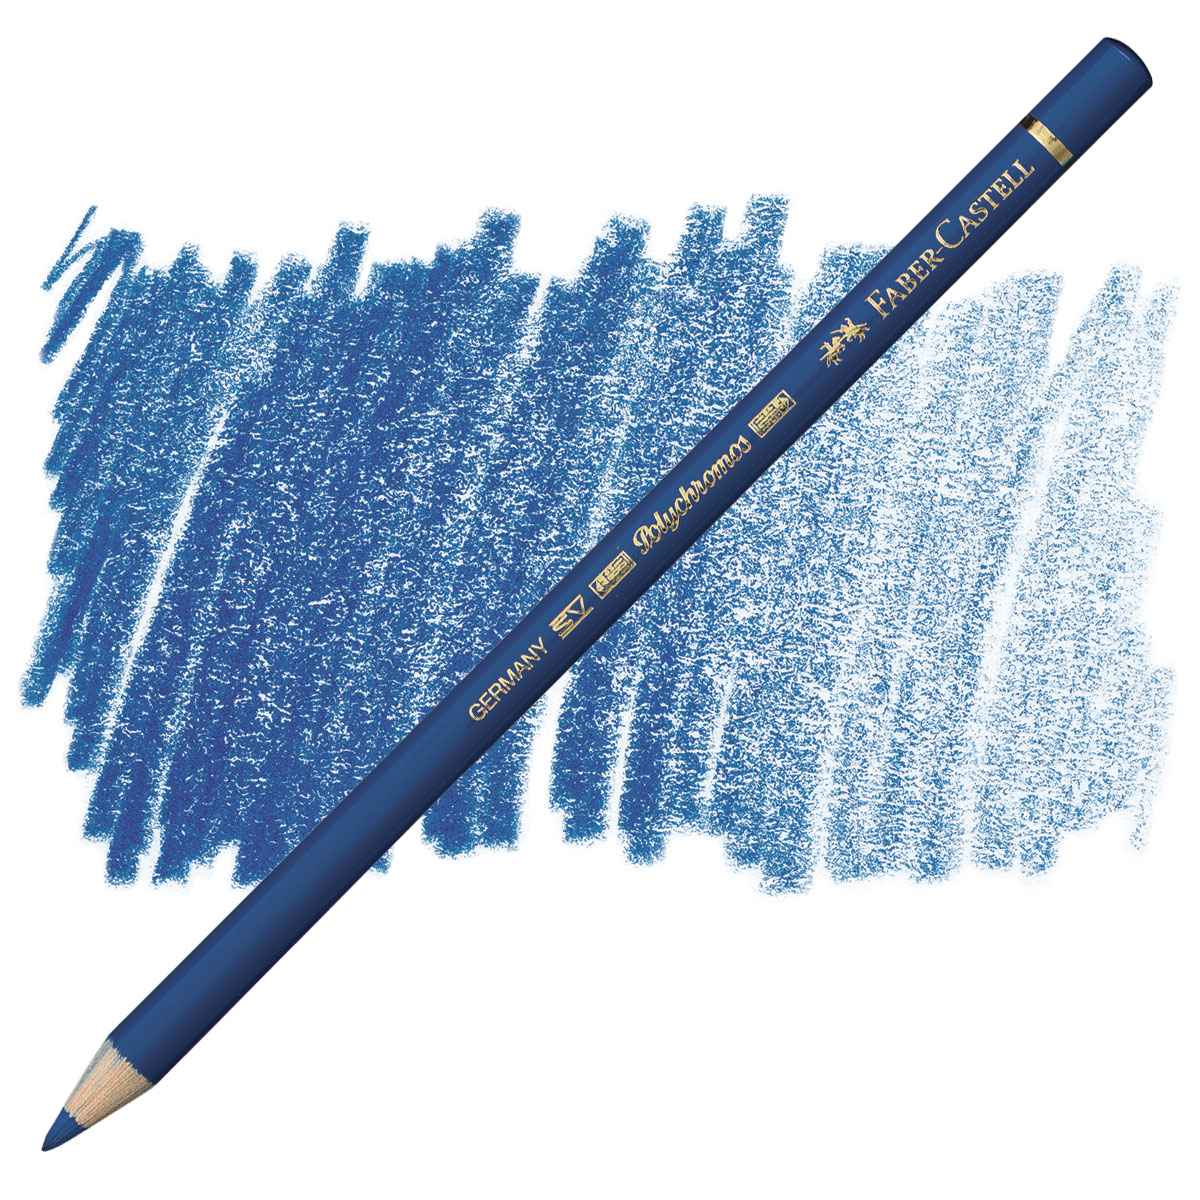 Faber-Castell Polychromos Colour Pencil – Basic Colors and